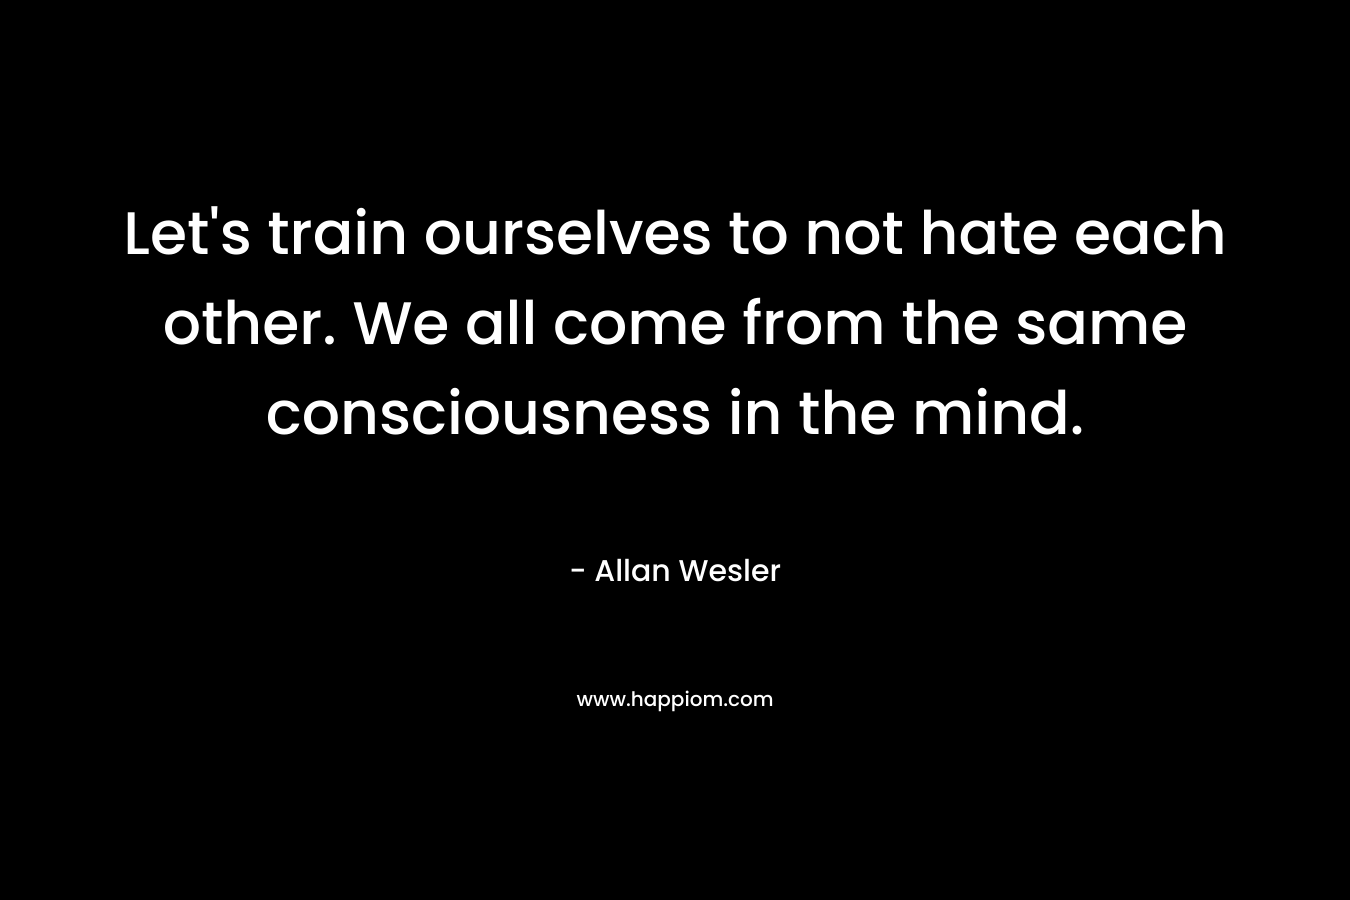 Let's train ourselves to not hate each other. We all come from the same consciousness in the mind.